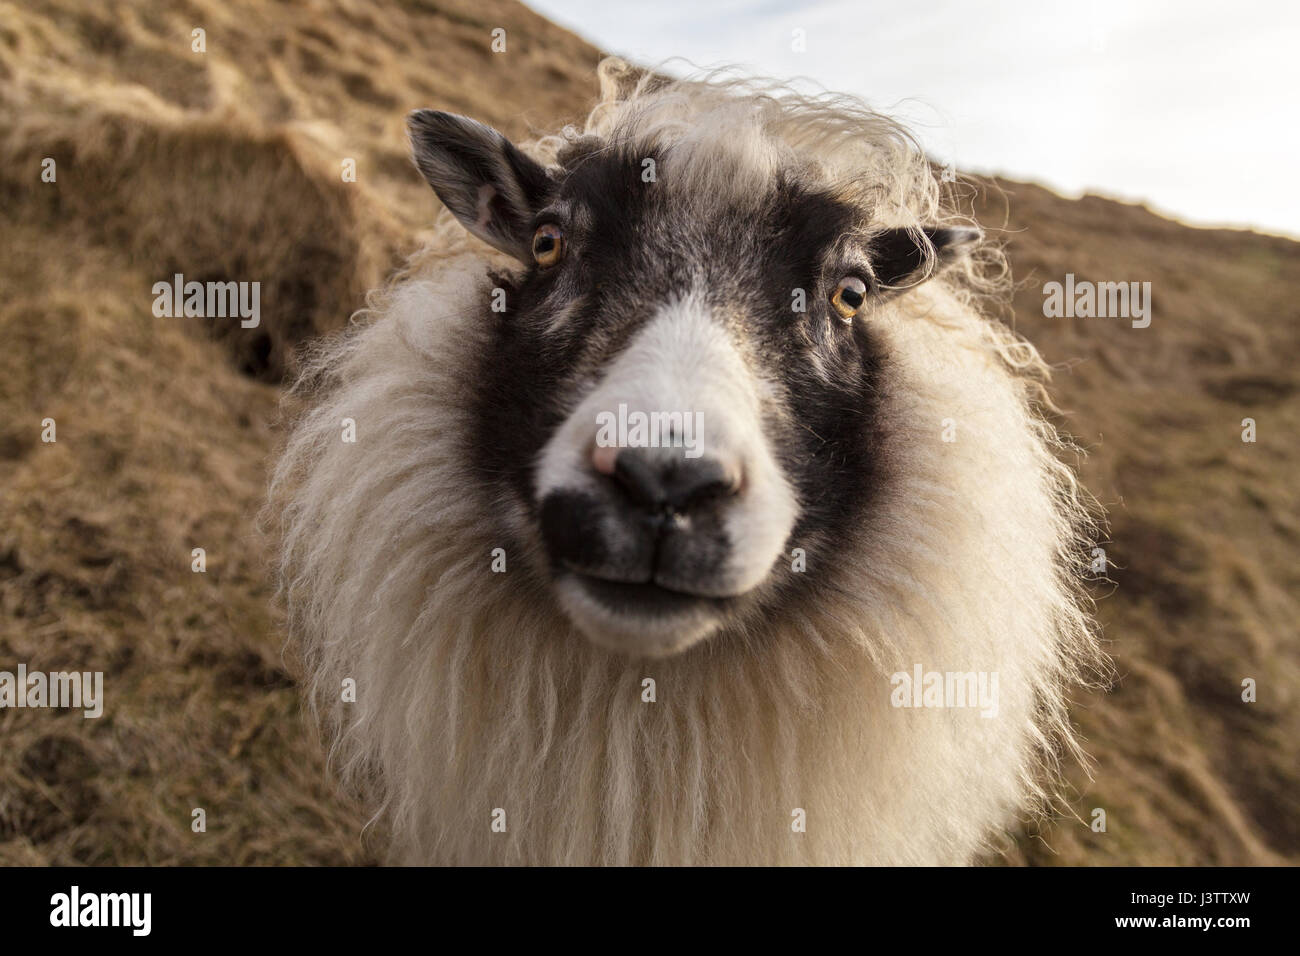 Traditional, long haired, white Icelandic sheep looking directly into the camera. It is on the side of a steep hill with brown winter vegetation. The Stock Photo